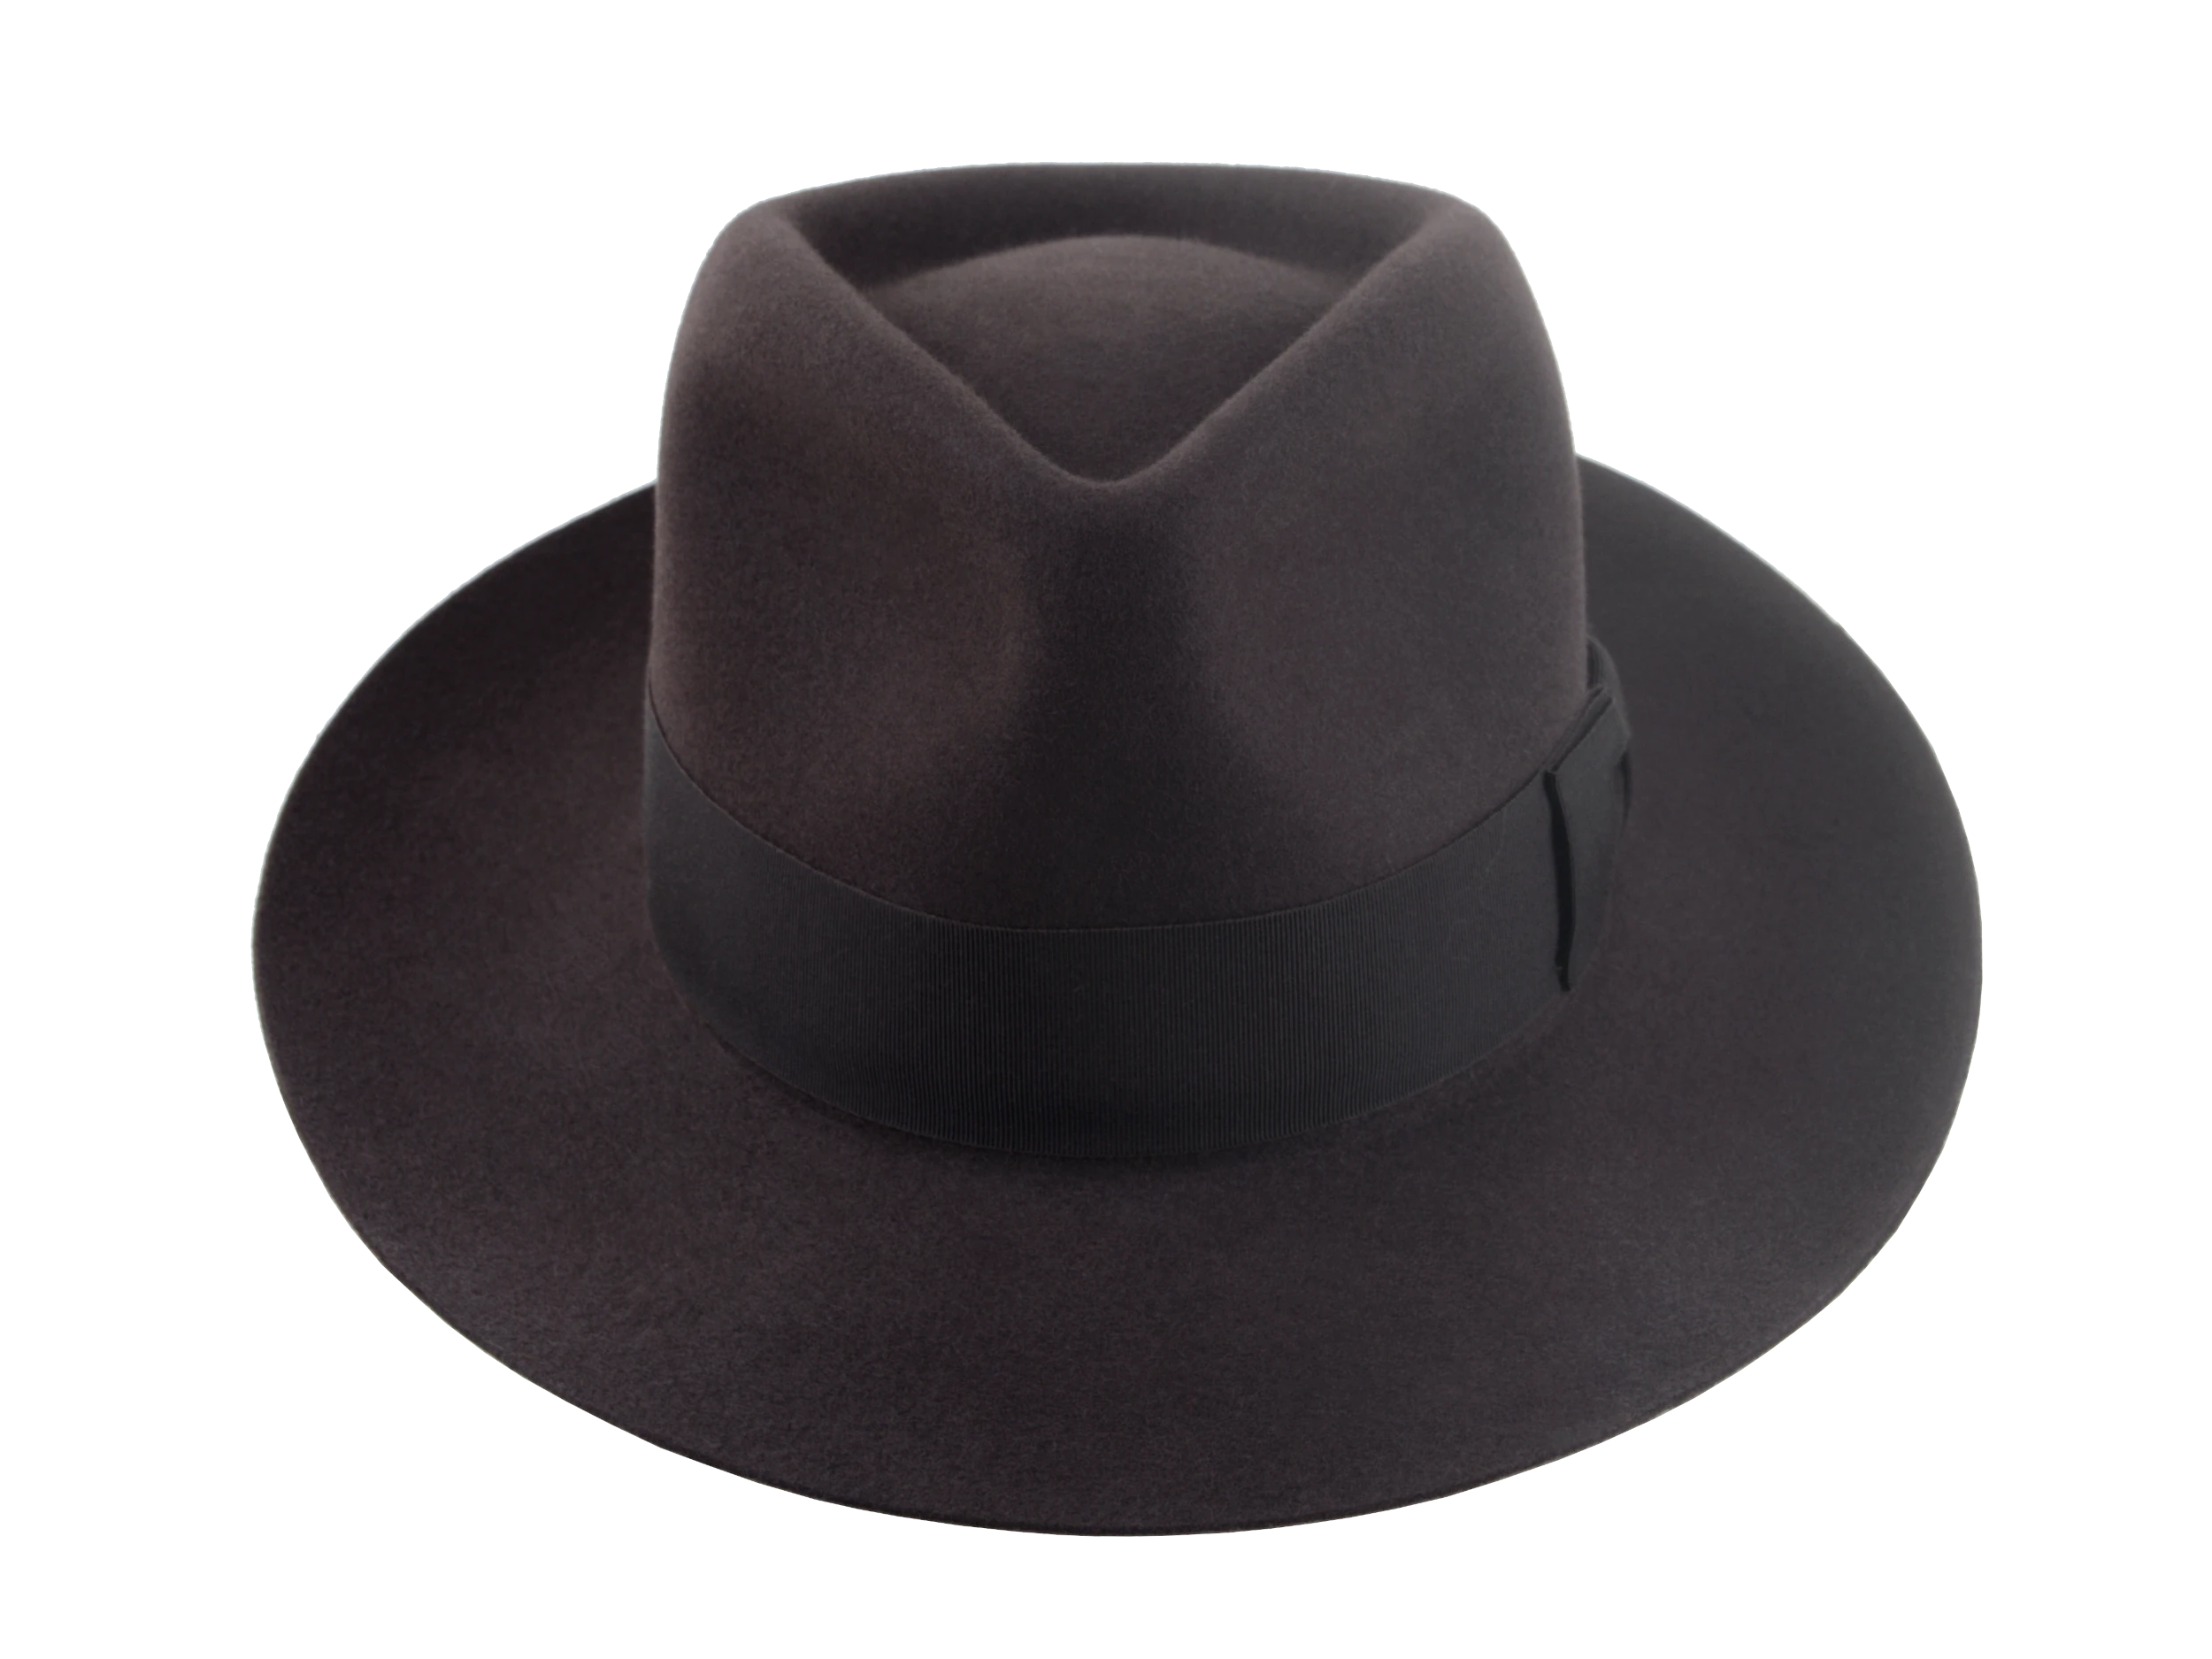 The Palladin: angle capturing the full silhouette of the hat, emphasizing its classic proportions | Agnoulita Hats